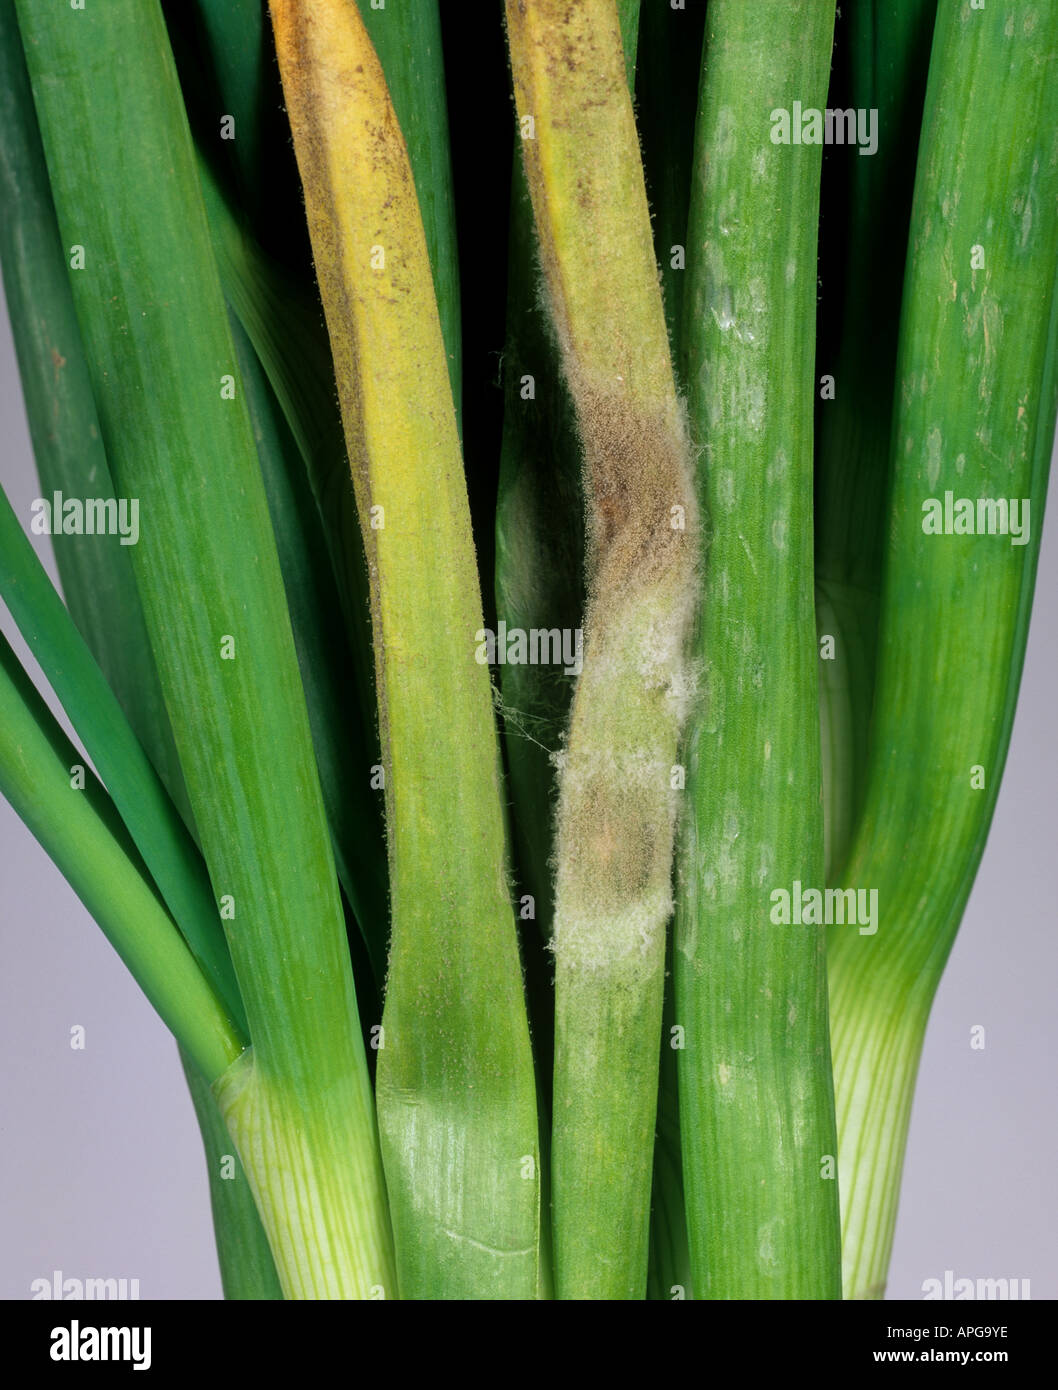 Downy mildew Peronospora destructor on the leaves of harvested spring onions Stock Photo